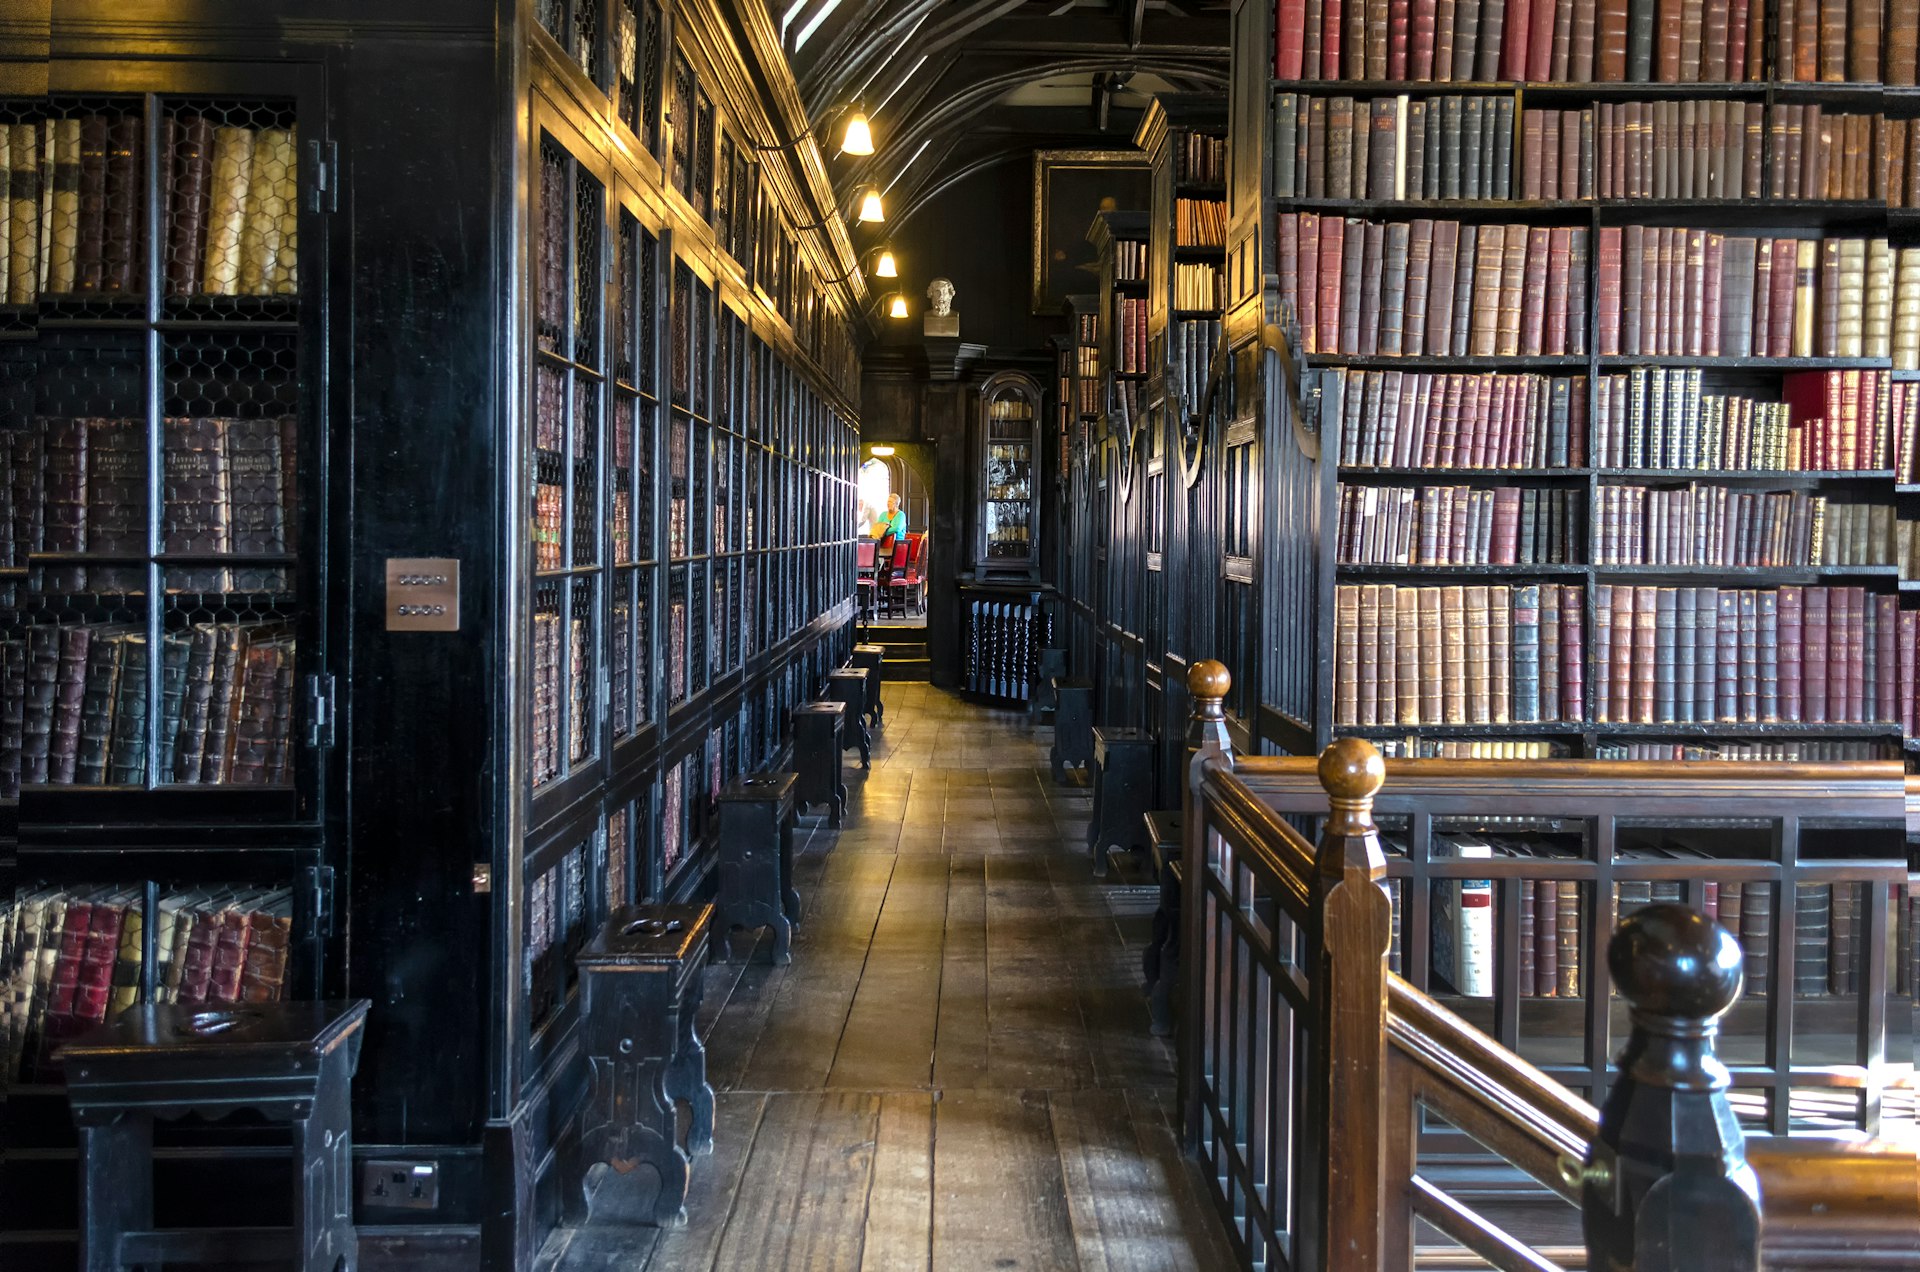 Chetham’s Library in Manchester, England, is the oldest public library in the English-speaking world, first opened to the public in 1653